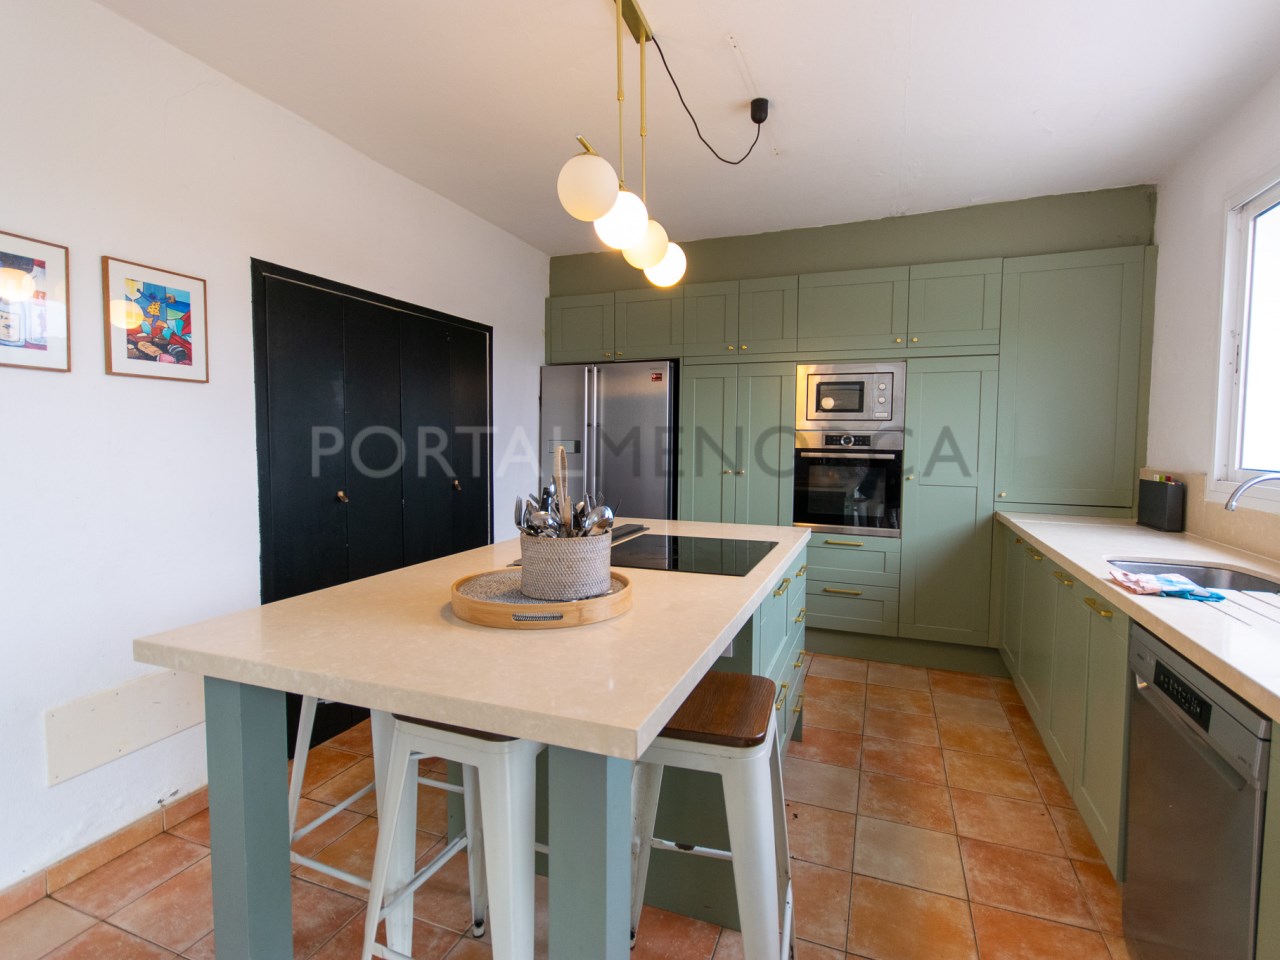 Kitchen of charming house with grounds and views of the village of Ferreries